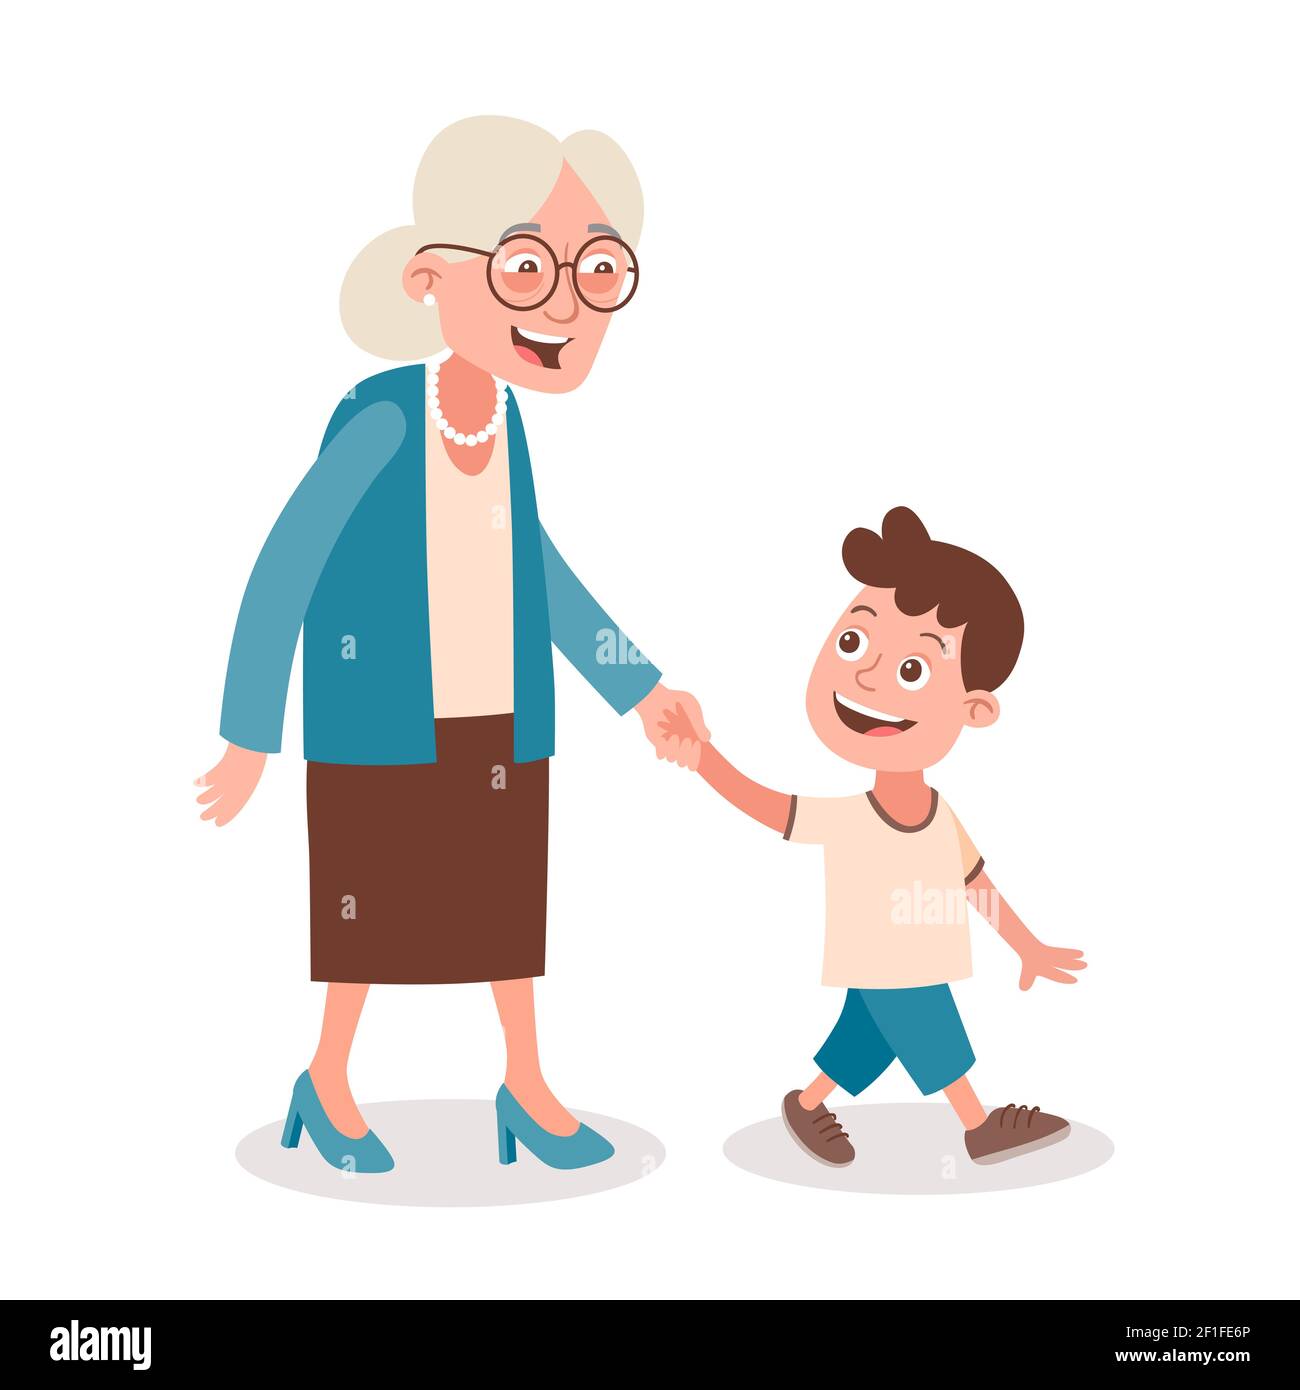 Grandmother and grandson walking and speaking, she takes him by the hand. Cartoon style, isolated on white background. Vector illustration. Stock Vector